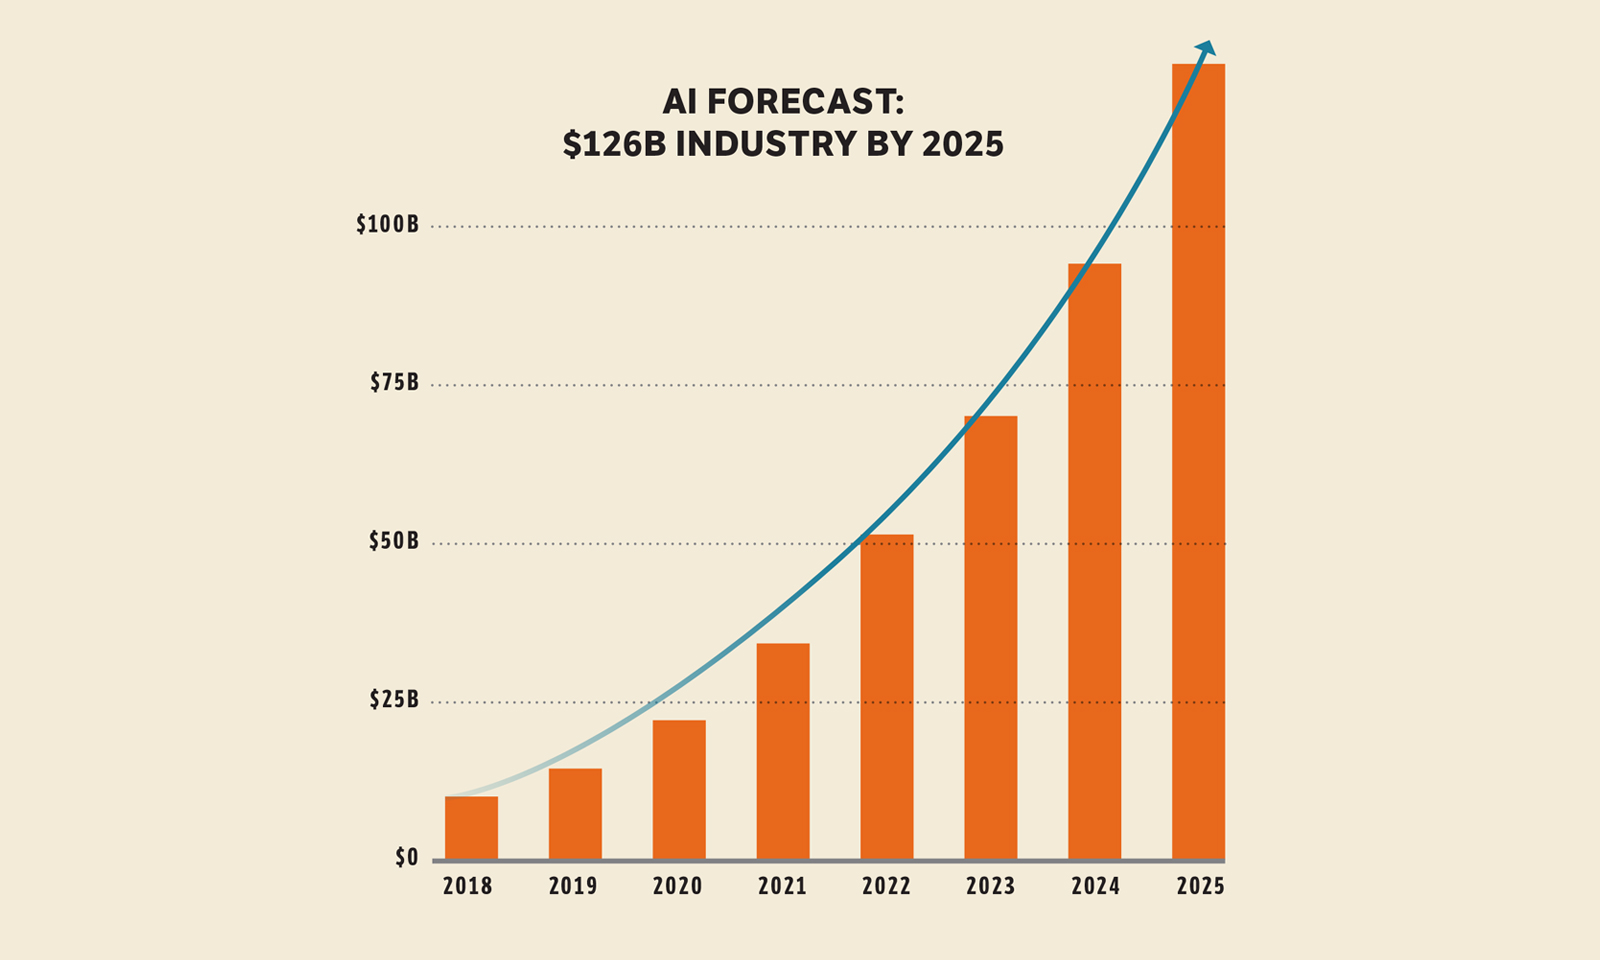 Capturing a big share of the AI industry